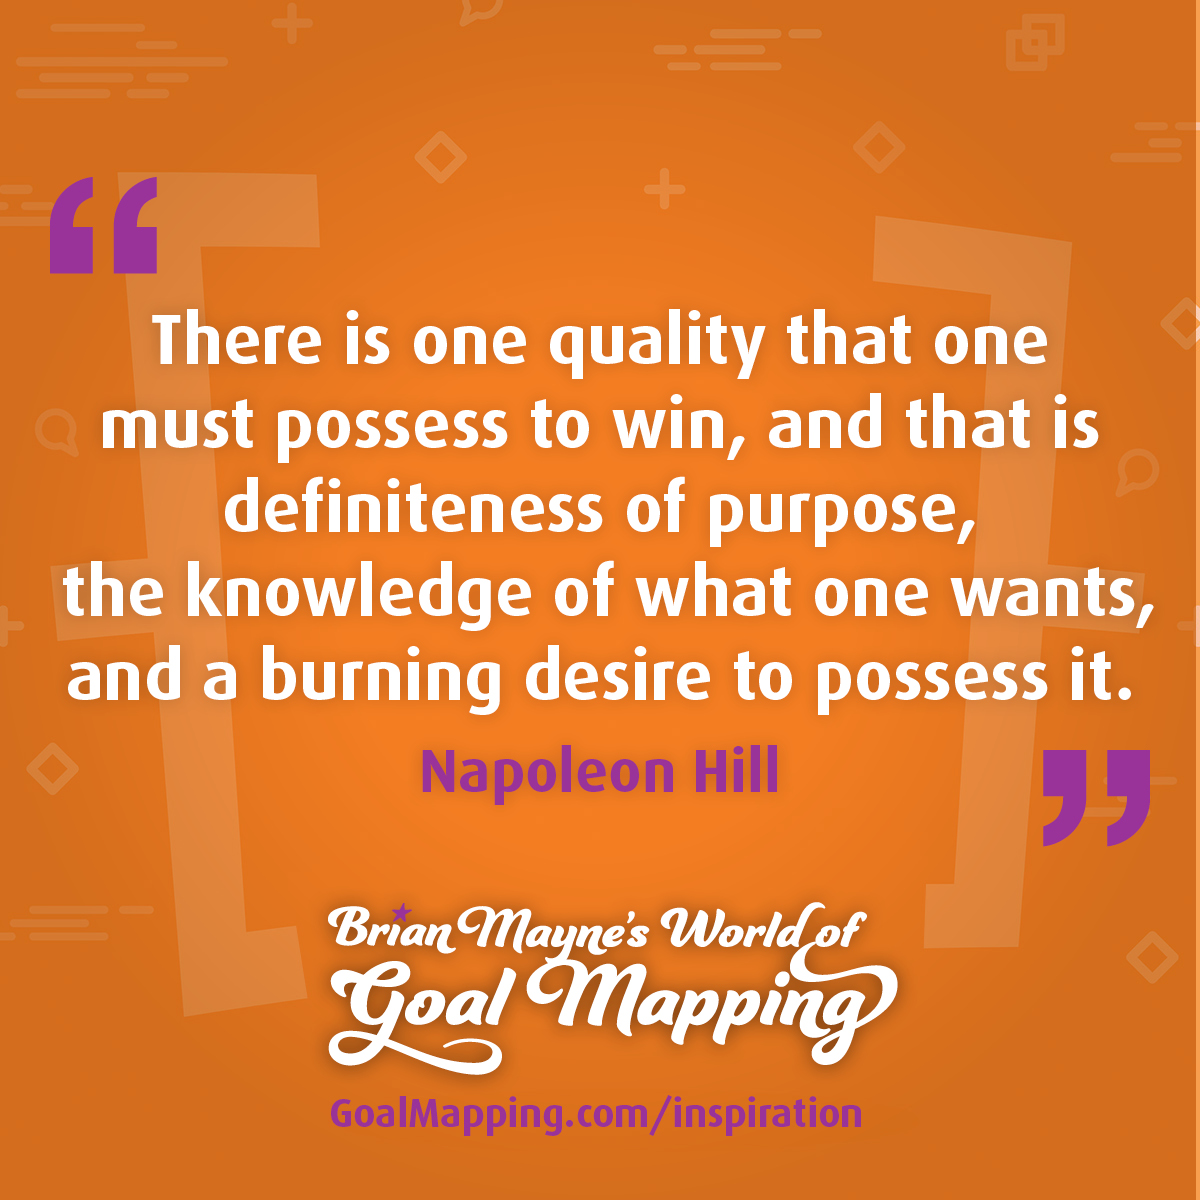 "There is one quality that one must possess to win, and that is definiteness of purpose, the knowledge of what one wants, and a burning desire to possess it." Napoleon Hill